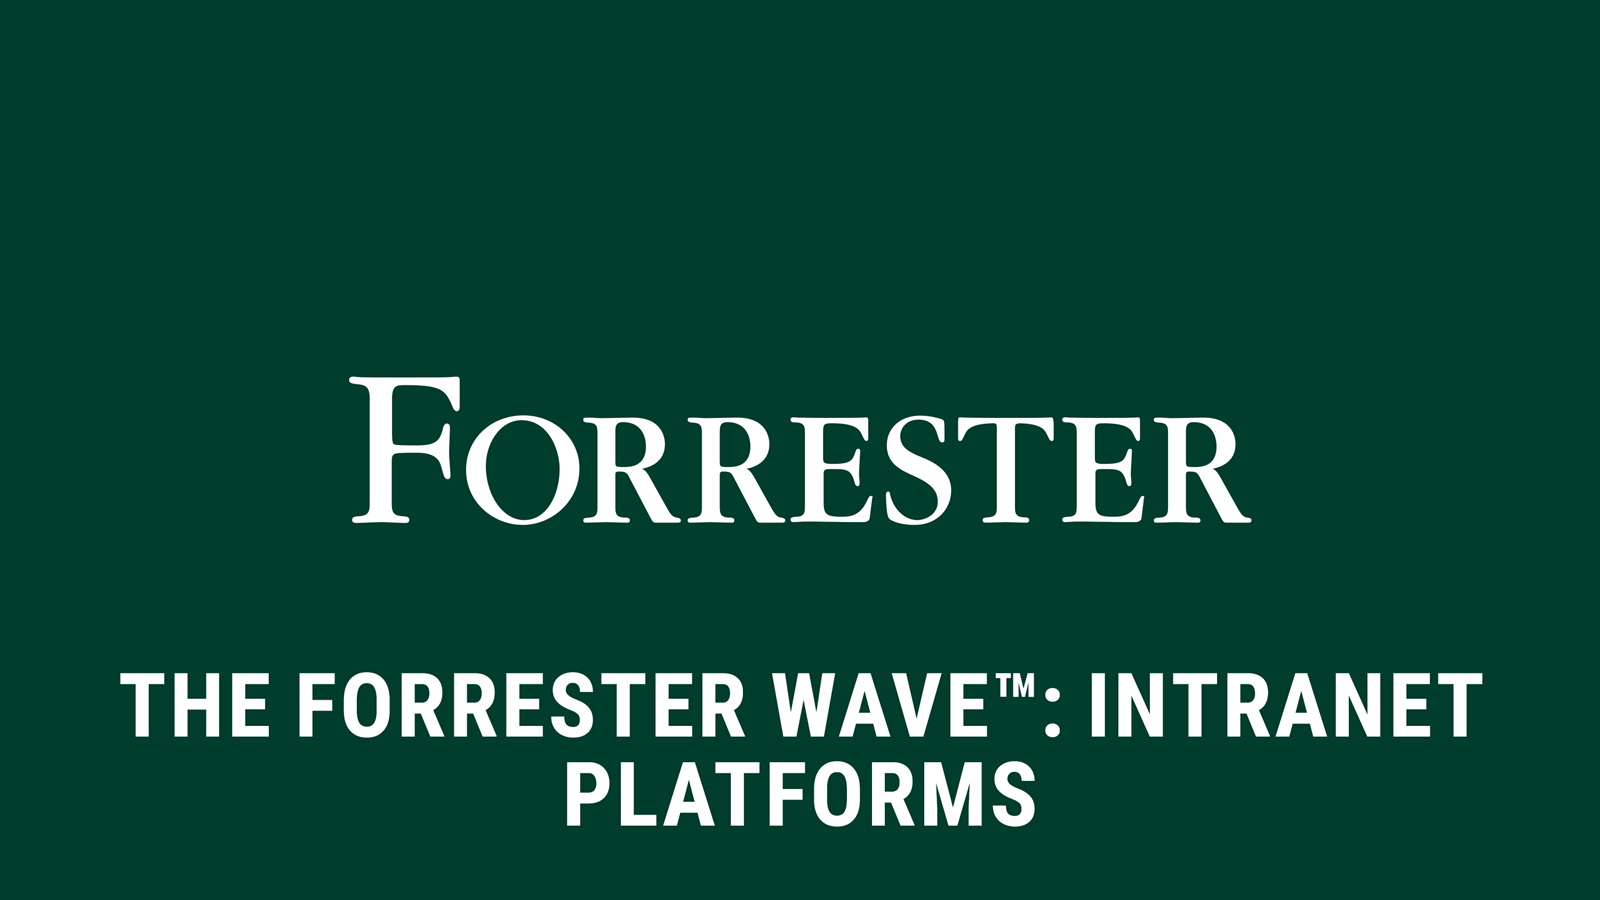 'The Forrester Wave™: Intranet Platforms' report front cover